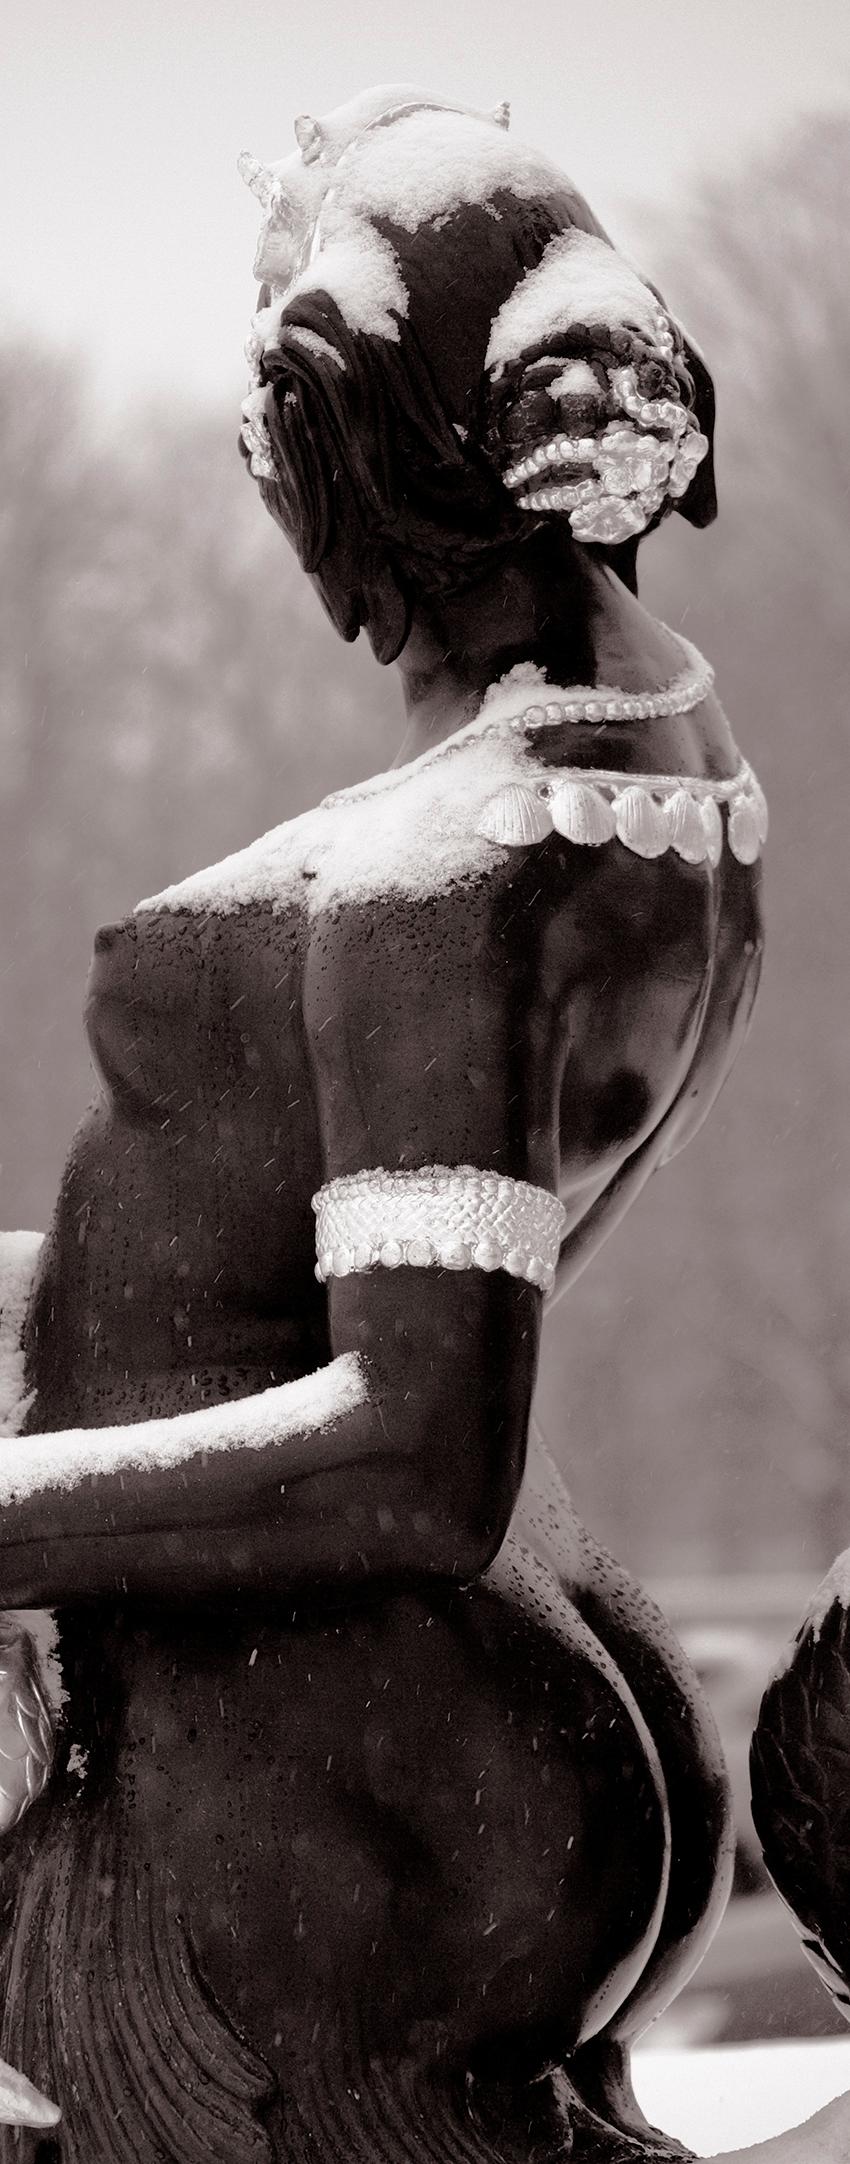 The french duchess - Limited edition pigment print  -   Limited Editions of 5
Sculpture of a naked woman covered in snow in the Tuileries gardens in Paris, France, 2005
Jardins des Tuileries

This is an Archival Pigment print on fiber based paper (